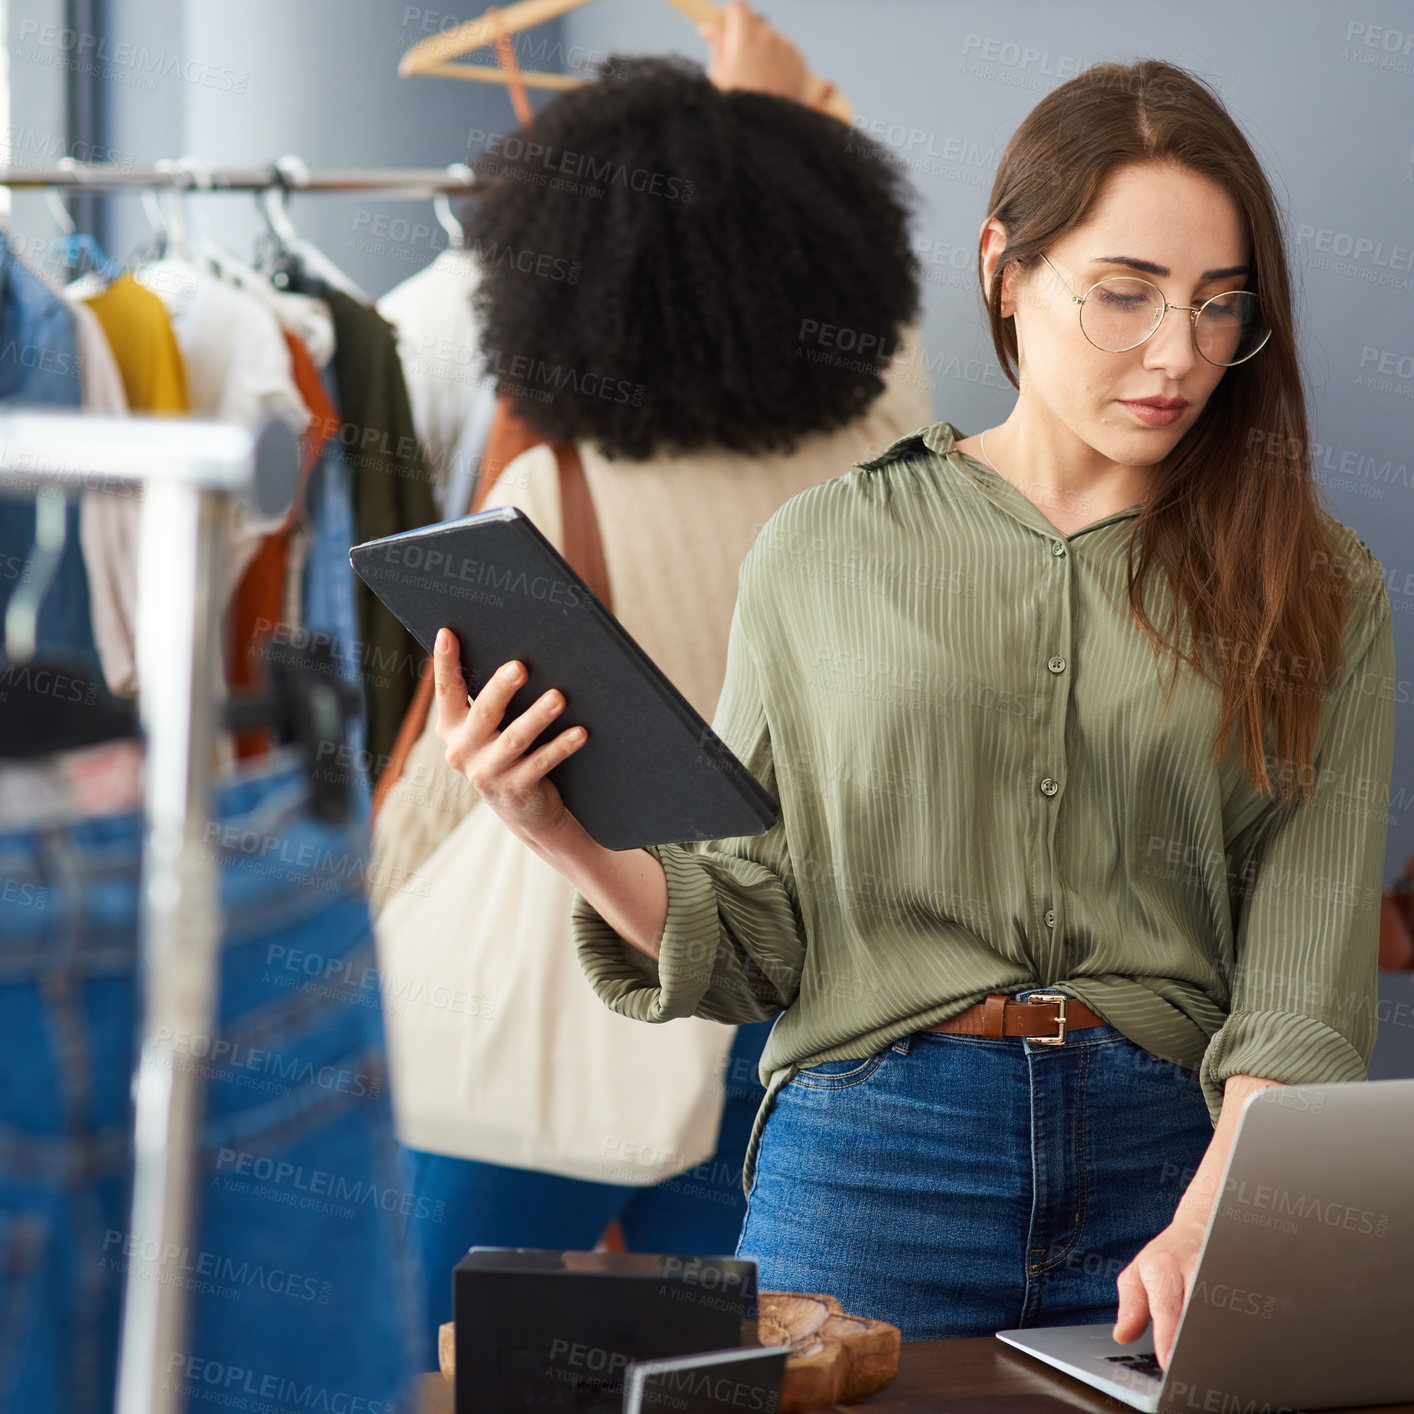 Buy stock photo Shot of a woman using a digital tablet while working in a clothing store